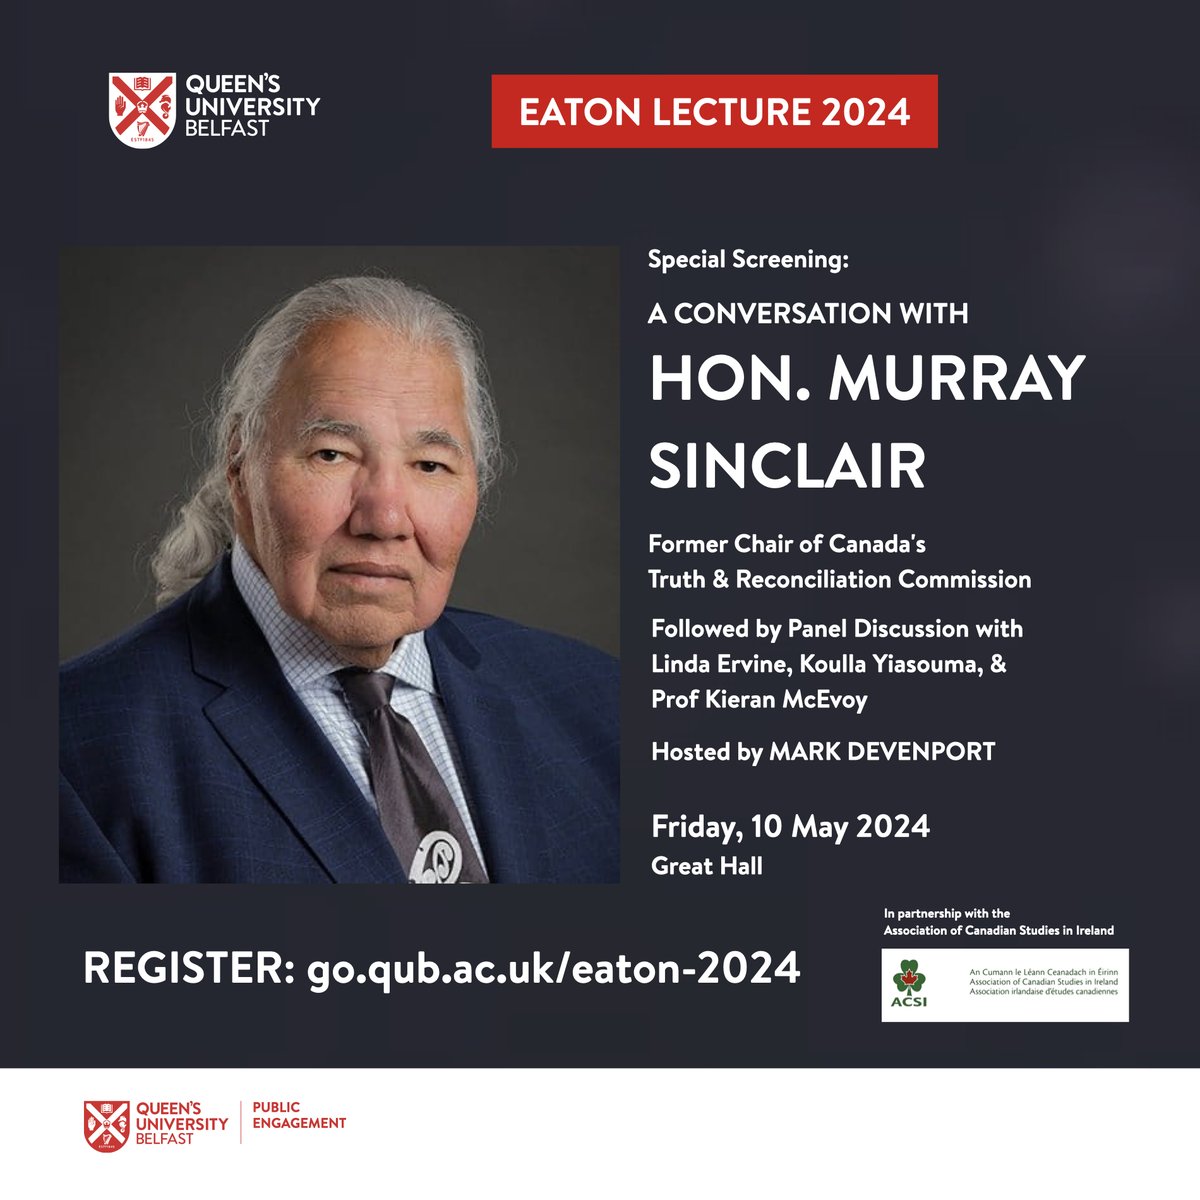 We’re excited to be showing a specially recorded conversation with Murray Sinclair, former Chief Commissioner of Canada’s Indian Residential Schools Truth and Reconciliation Commission, 10 May, Eaton Lecture 2024, followed by panel discussion! REGISTER: go.qub.ac.uk/eaton-2024